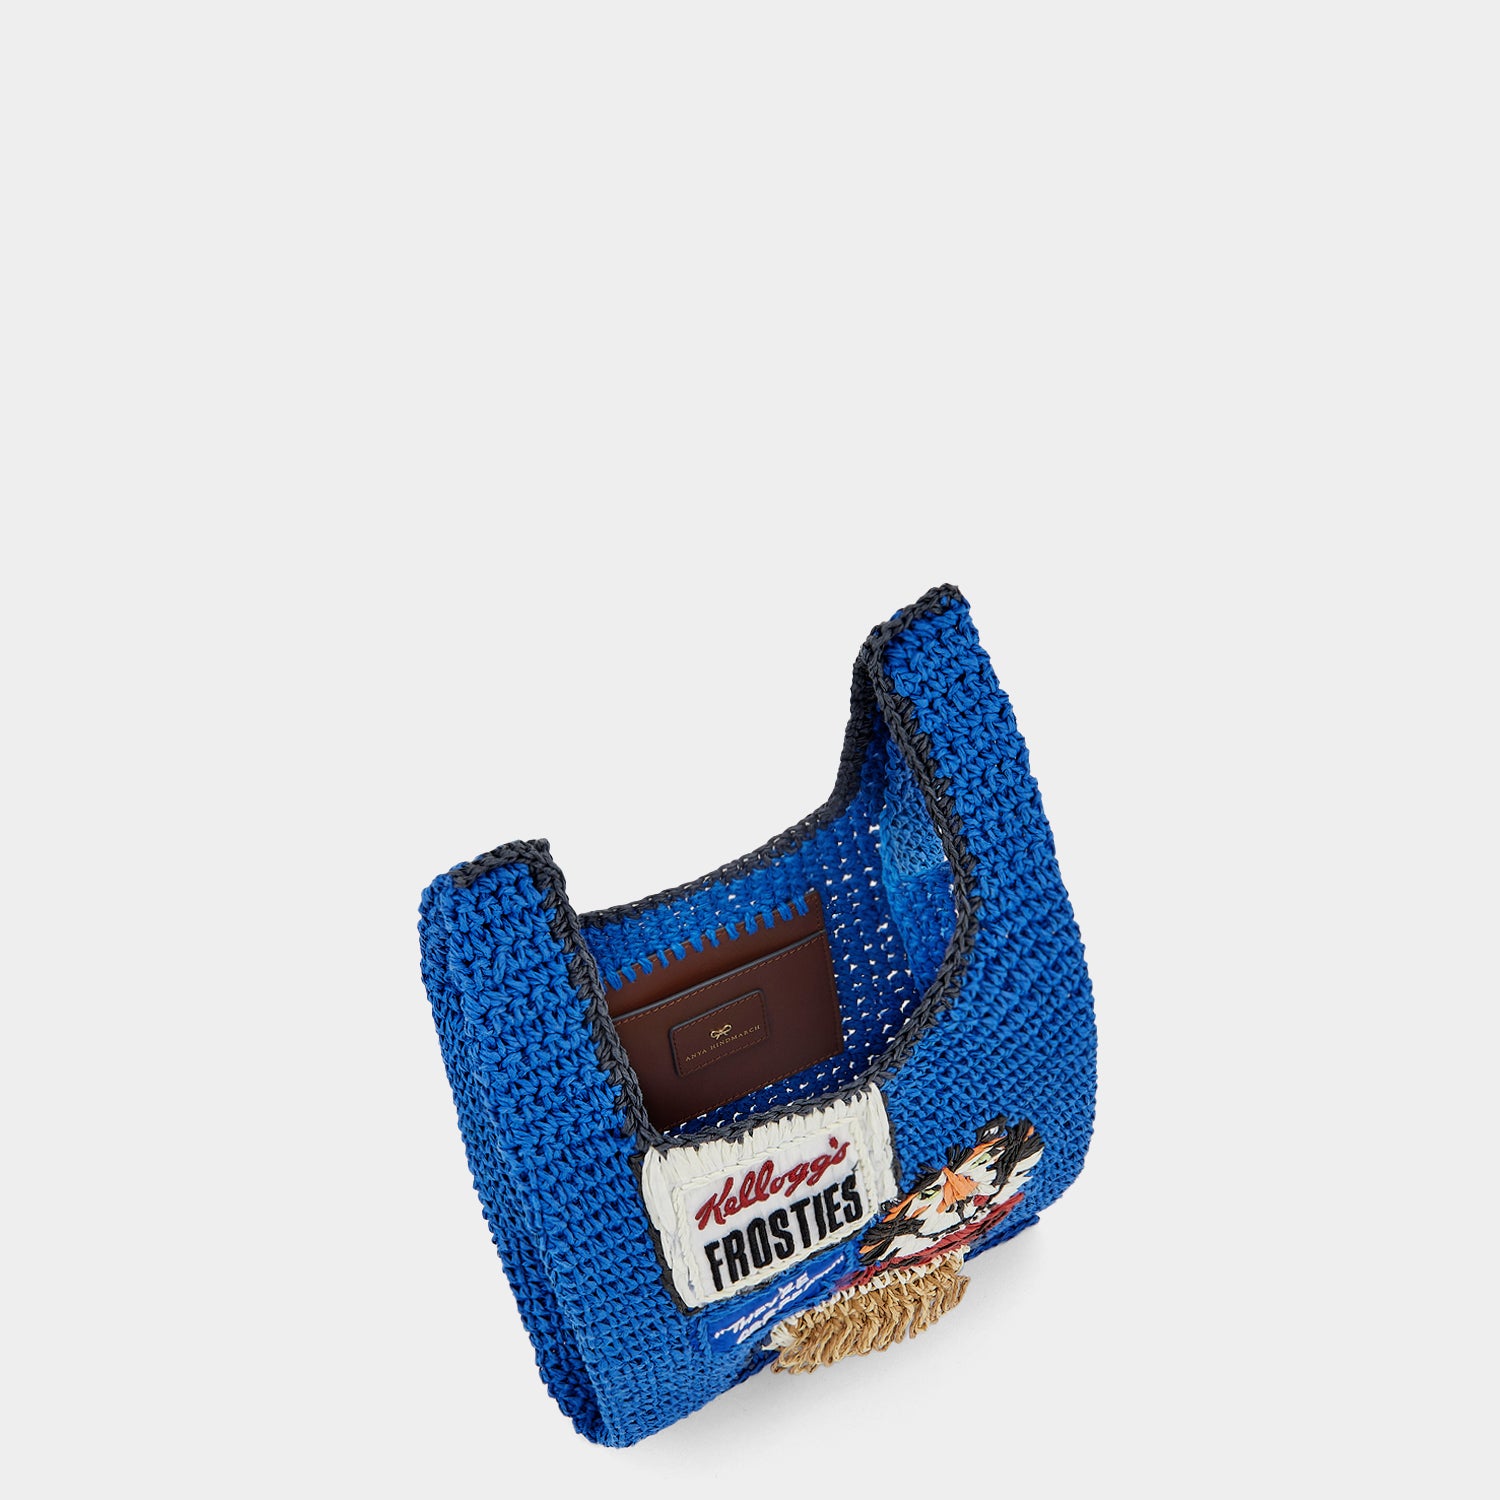 「Frosties」ラフィア ミニ トート -

                  
                    Paper Raffia in Electric Blue -
                  

                  Anya Hindmarch JP
